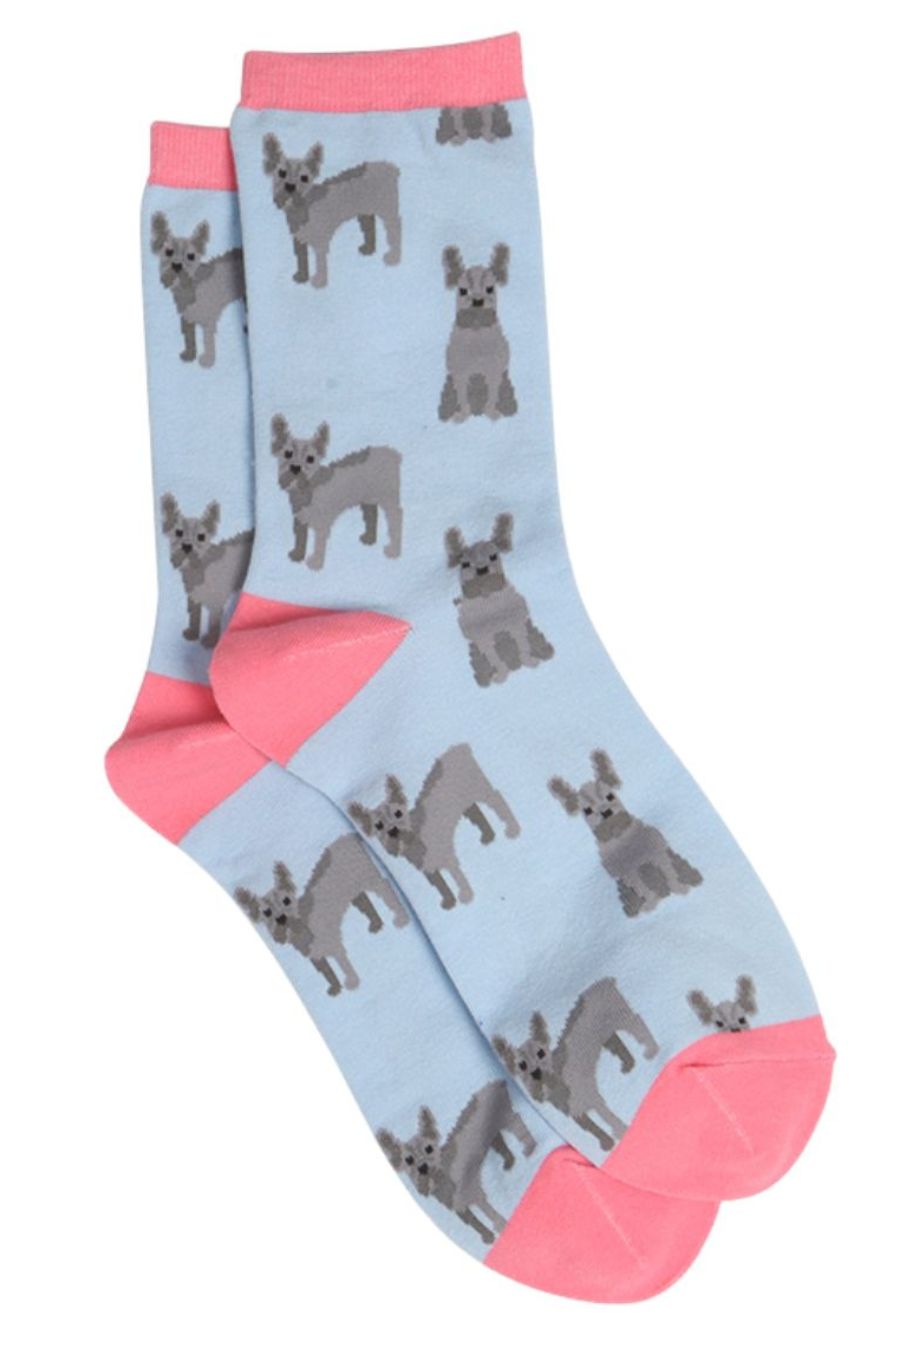 blue, pink ankle socks with french bulldogs on them